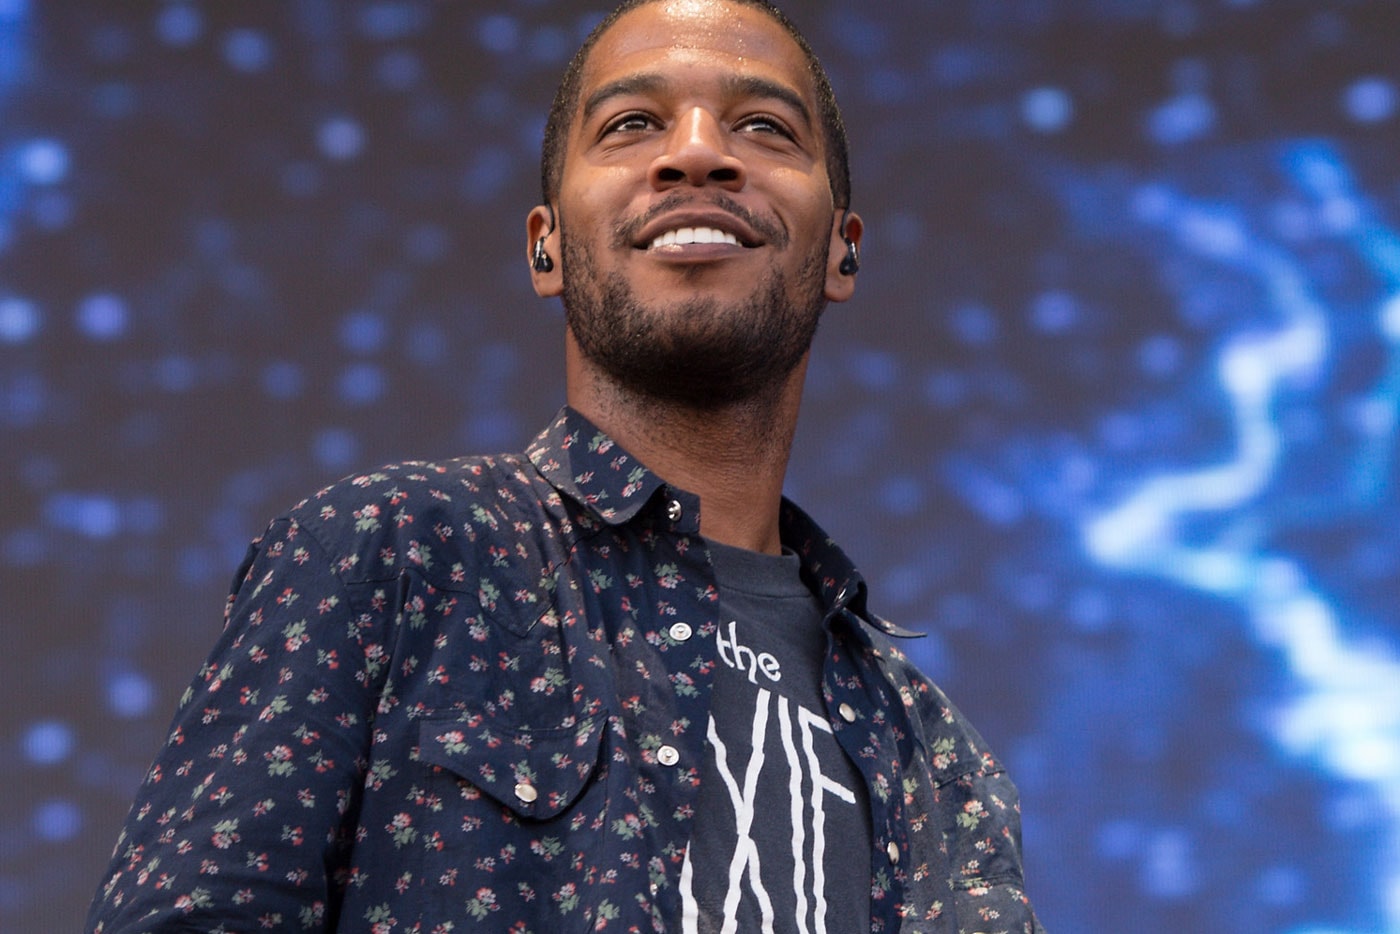 Kid Cudi's Thoughts on Kanye West's Tweets About Apple Music and TIDAL's Beef